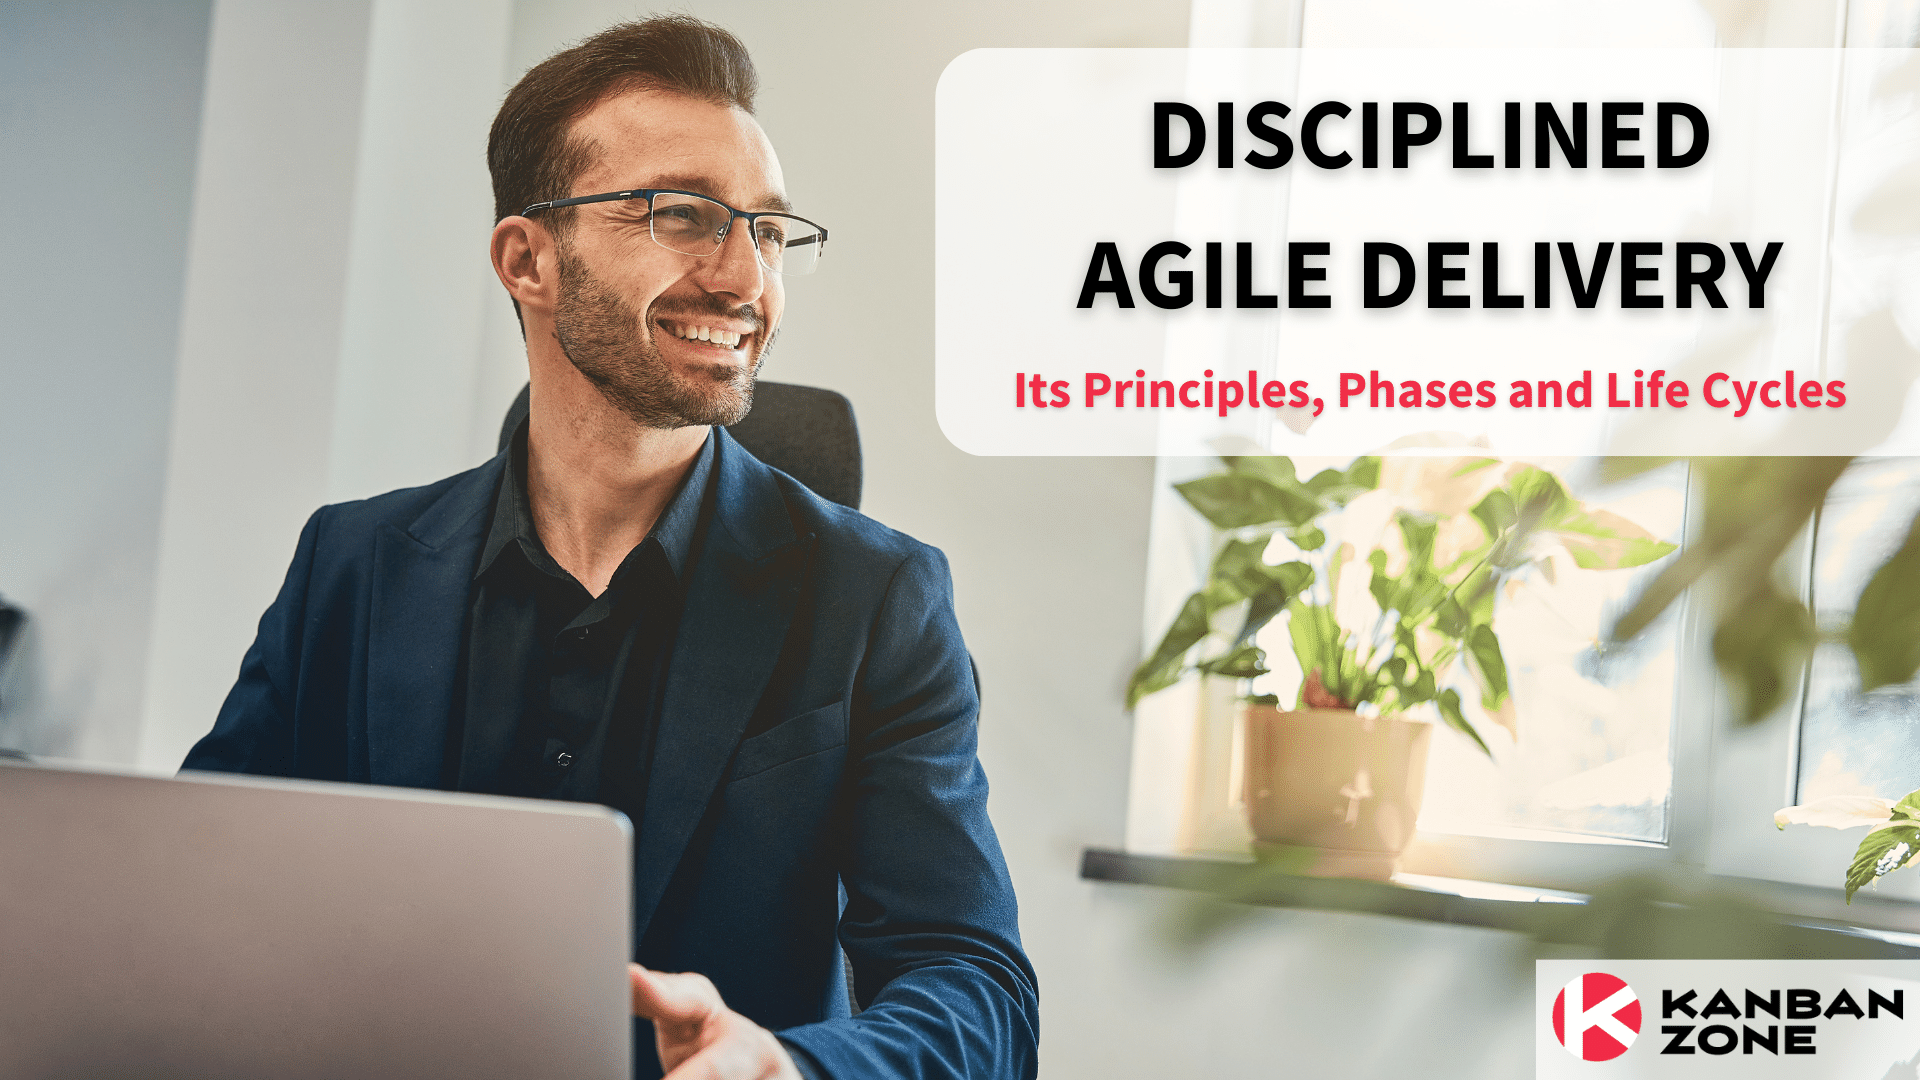 Disciplined Agile Delivery Its Principles, Phases and Life Cycles